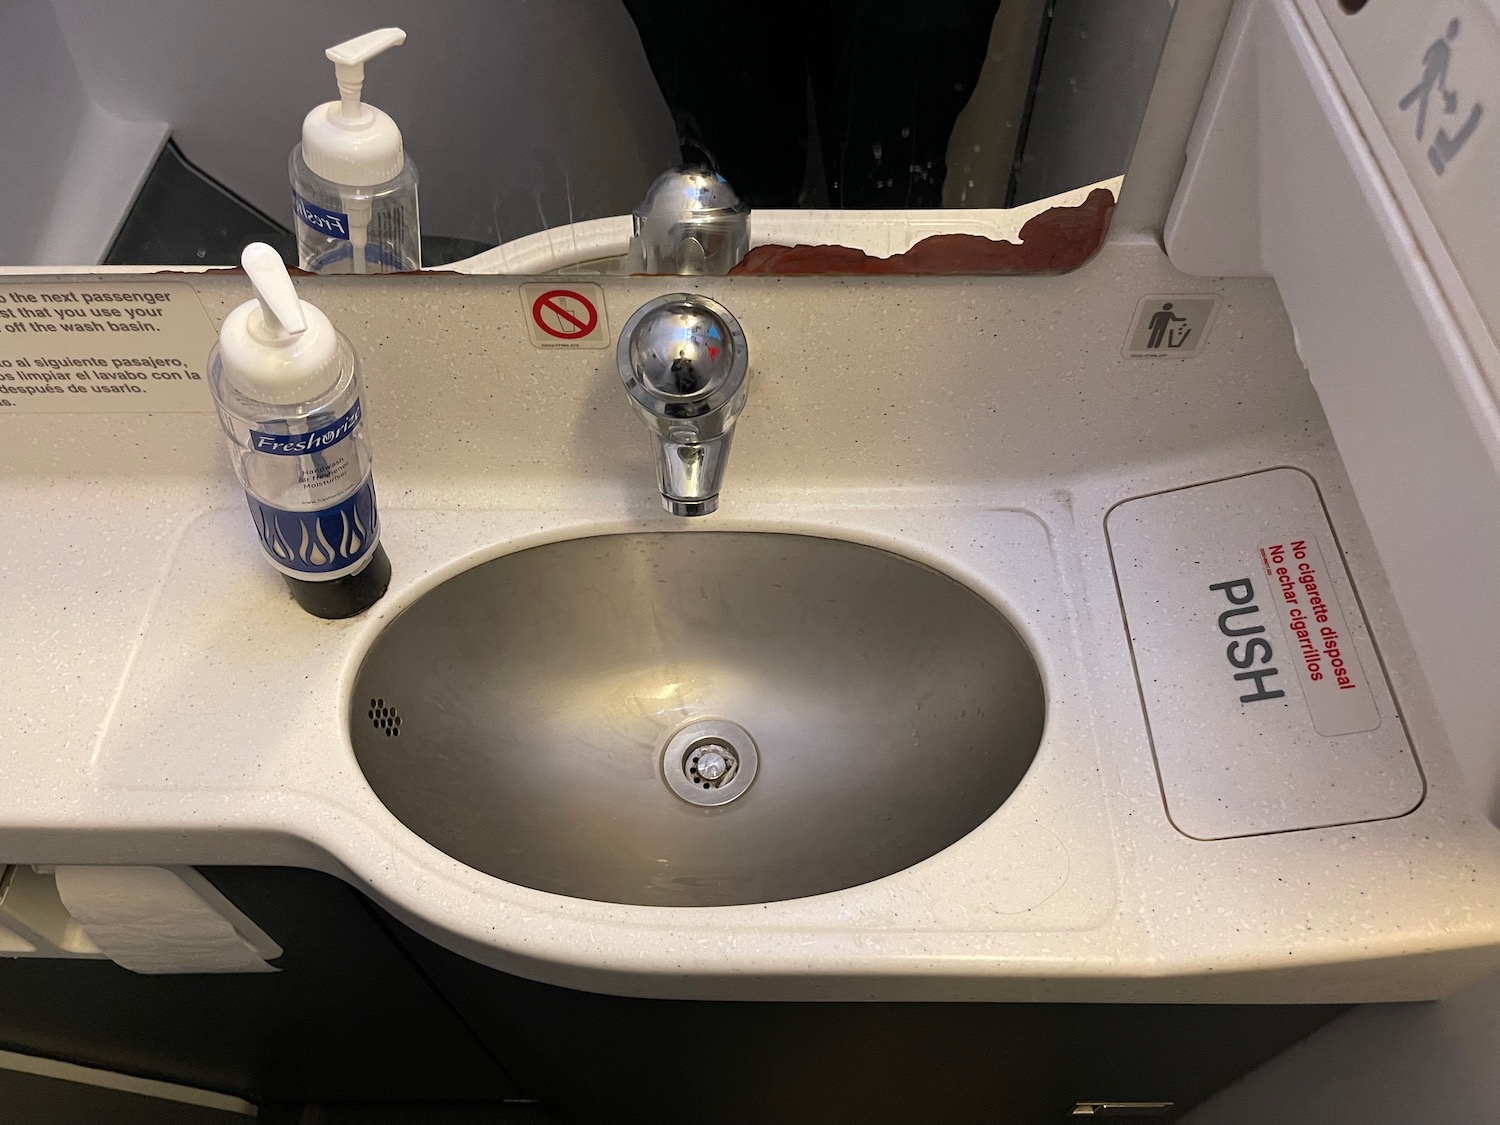 a sink with soap dispenser and bottle of liquid